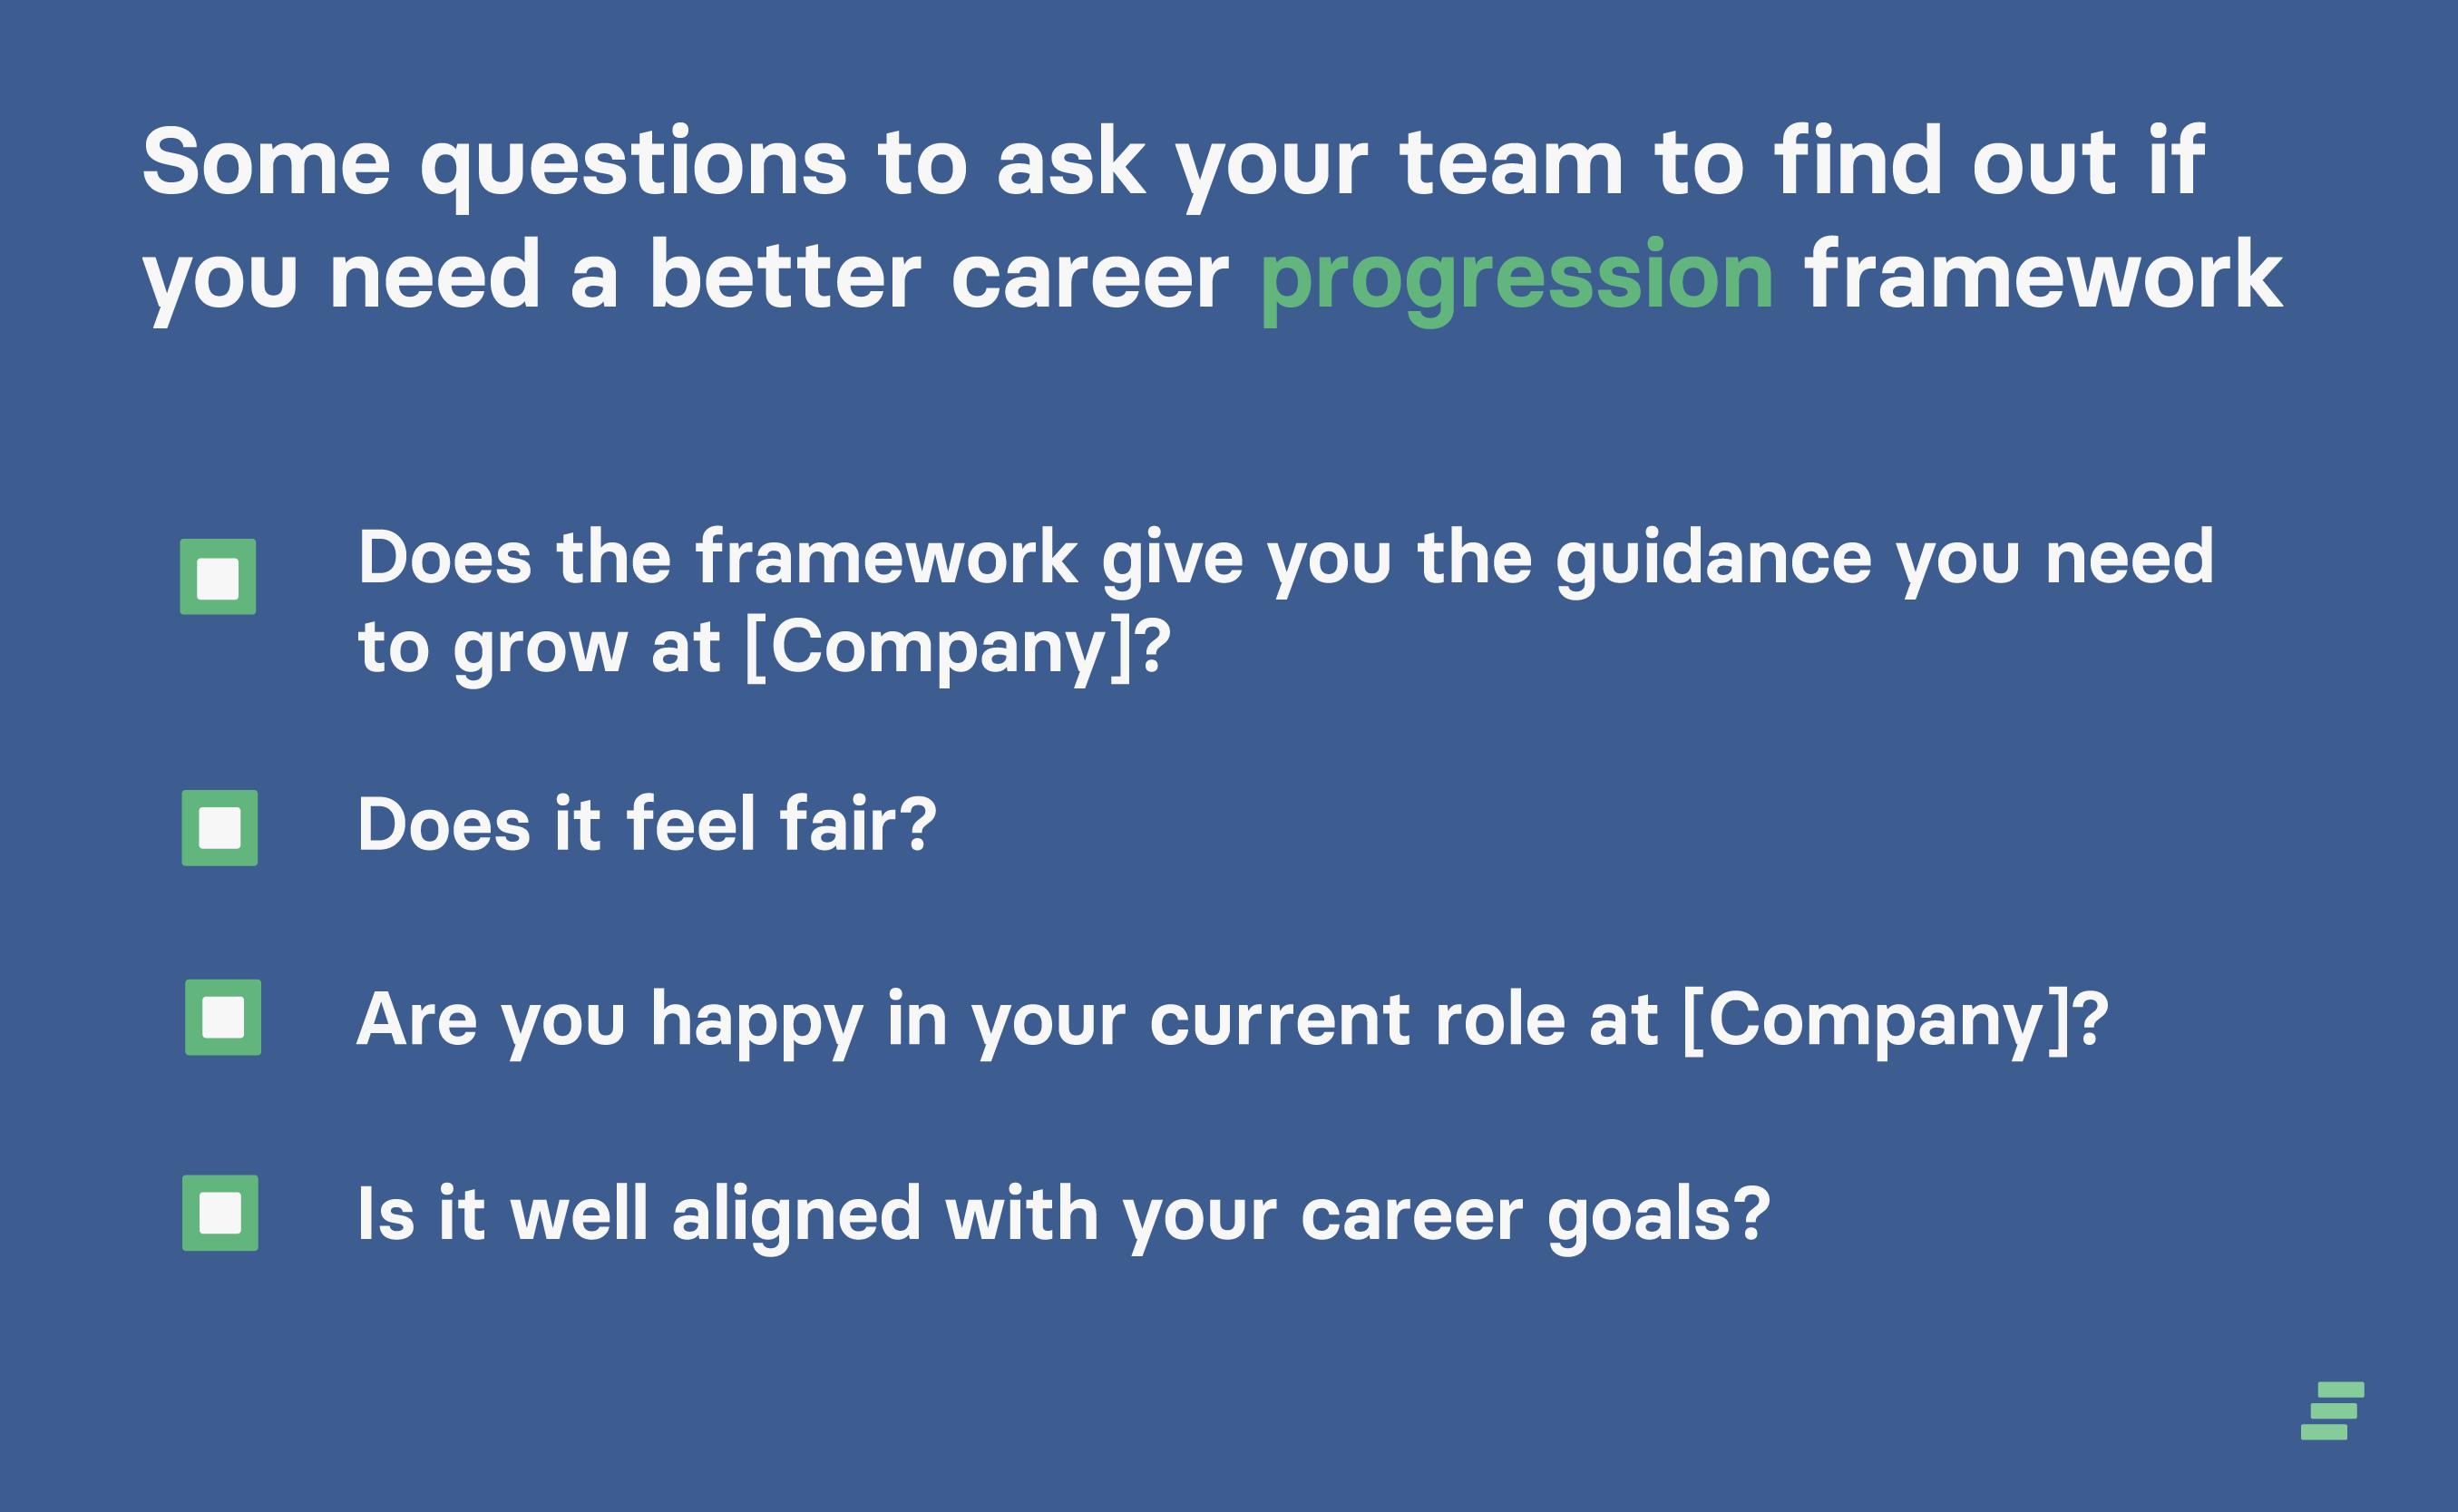 Graphic listing some questions to ask to find out if you need a better career progression framework